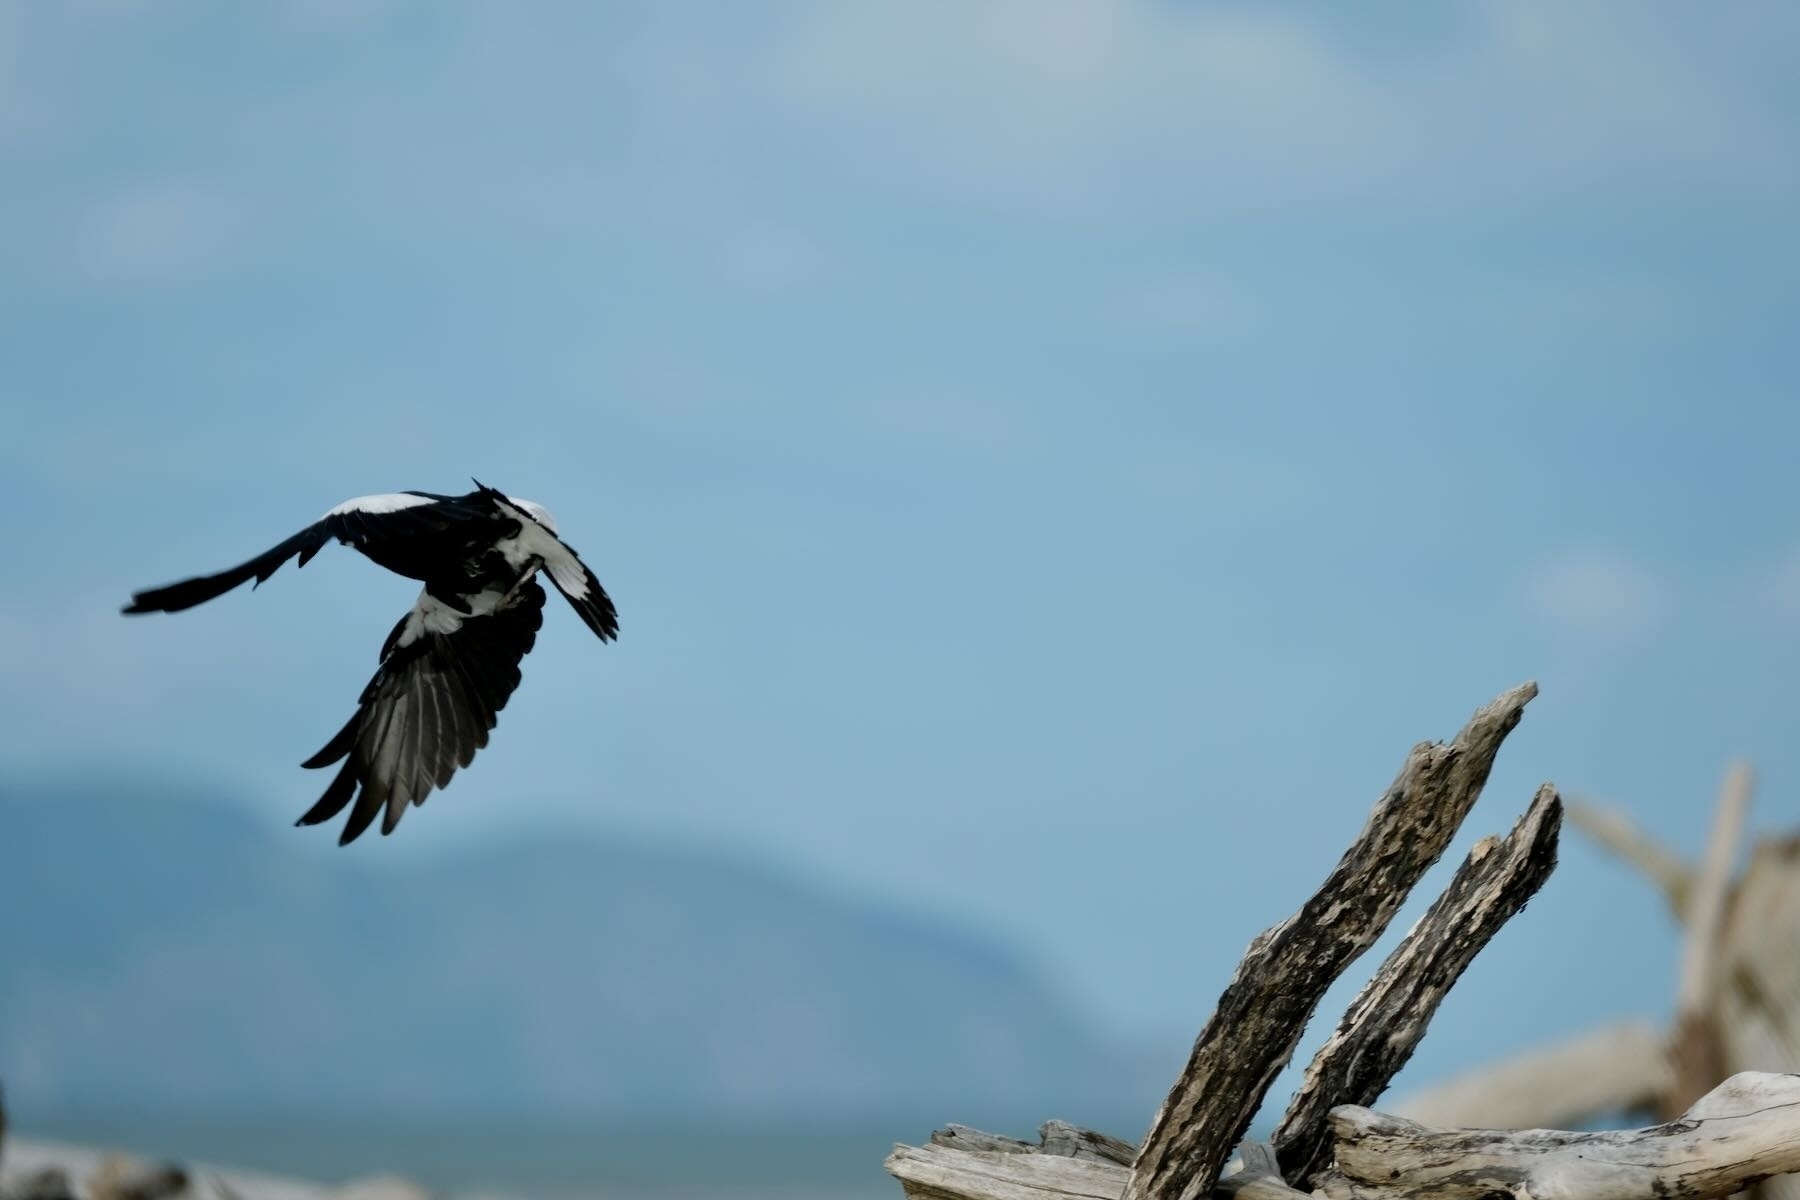 Rear view of Magpie as it flies off with wings down.